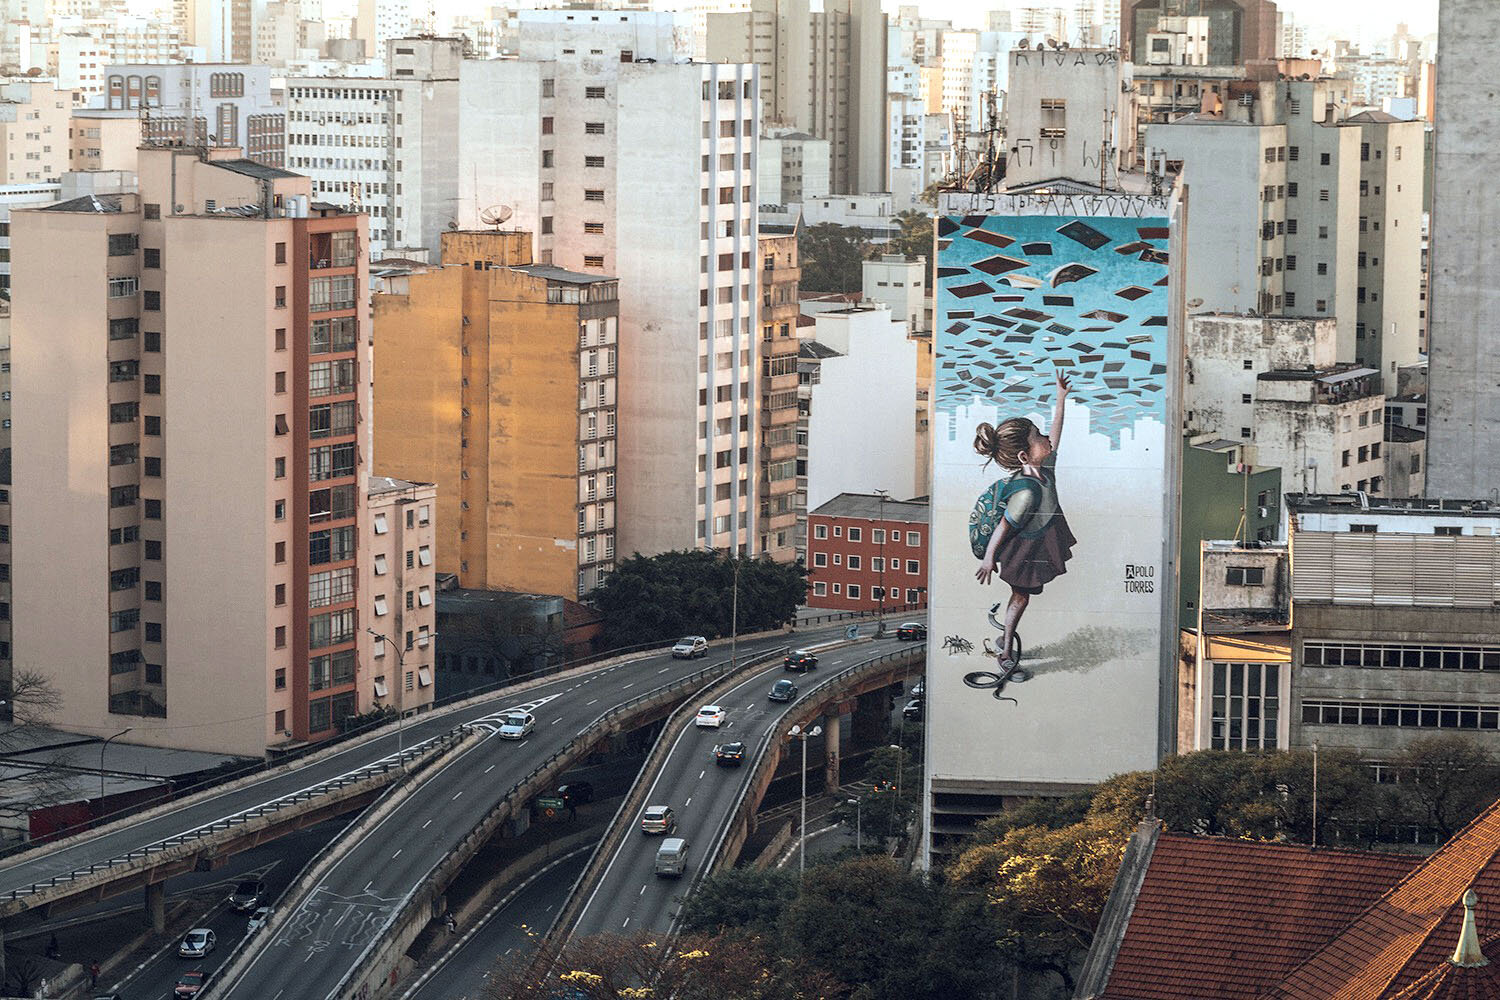 SÃO PAULO, BRAZIL A schoolgirl reaching for knowledge with a snake at her heels, by <a href=